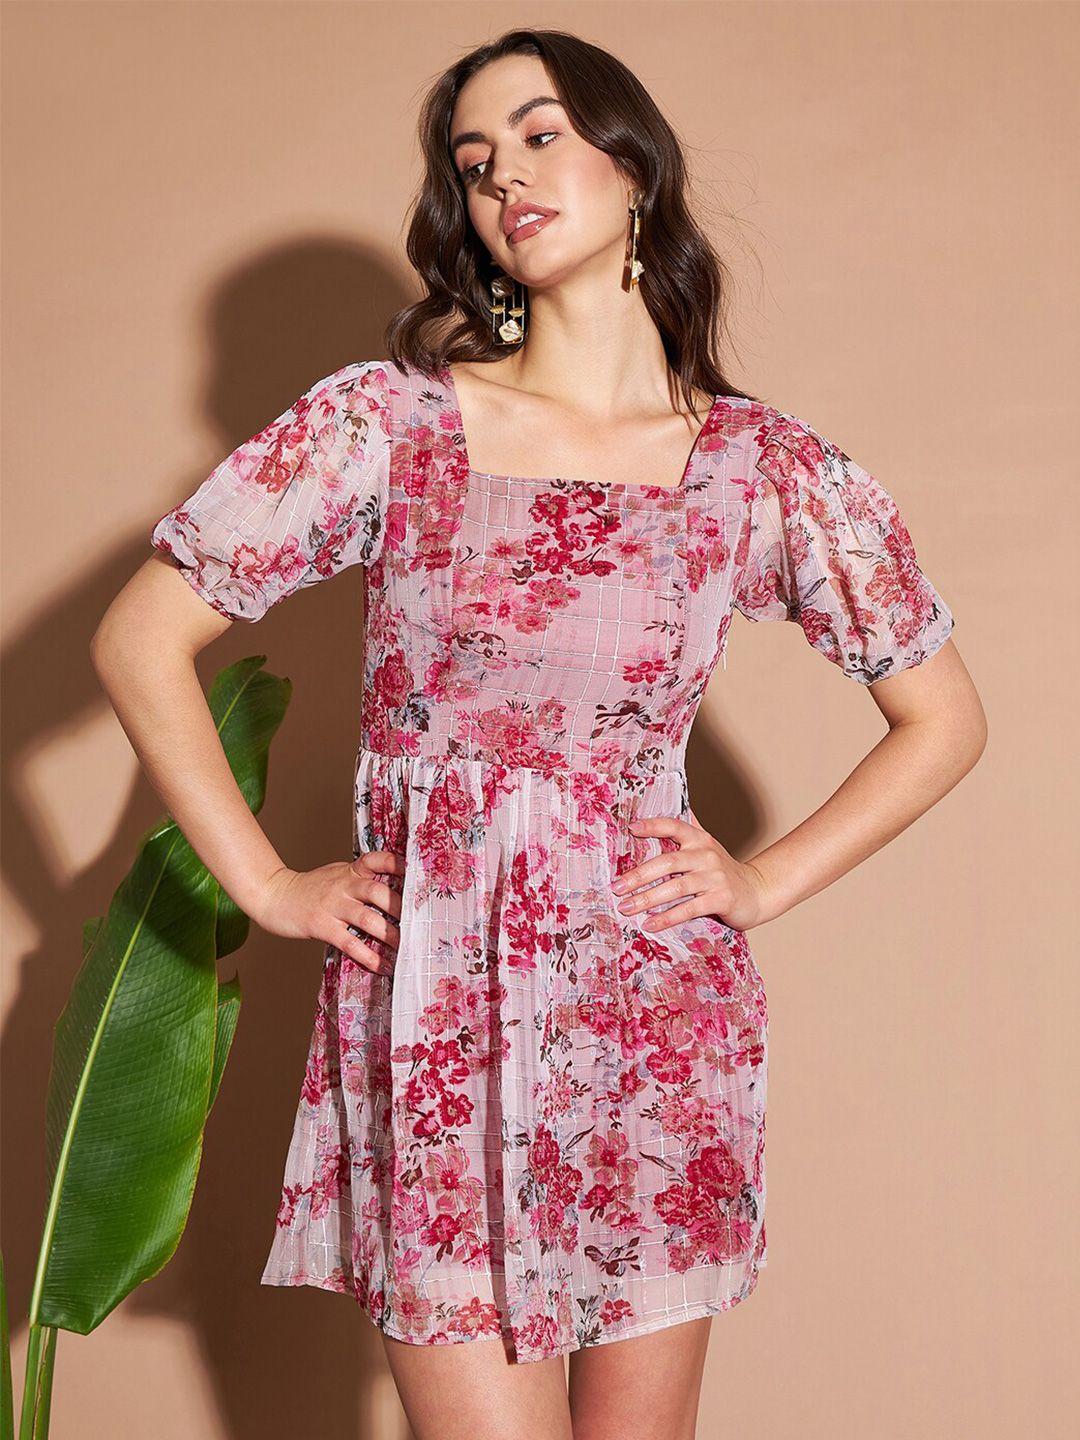 marie claire pink floral printed puff sleeve chiffon fit & flare dress